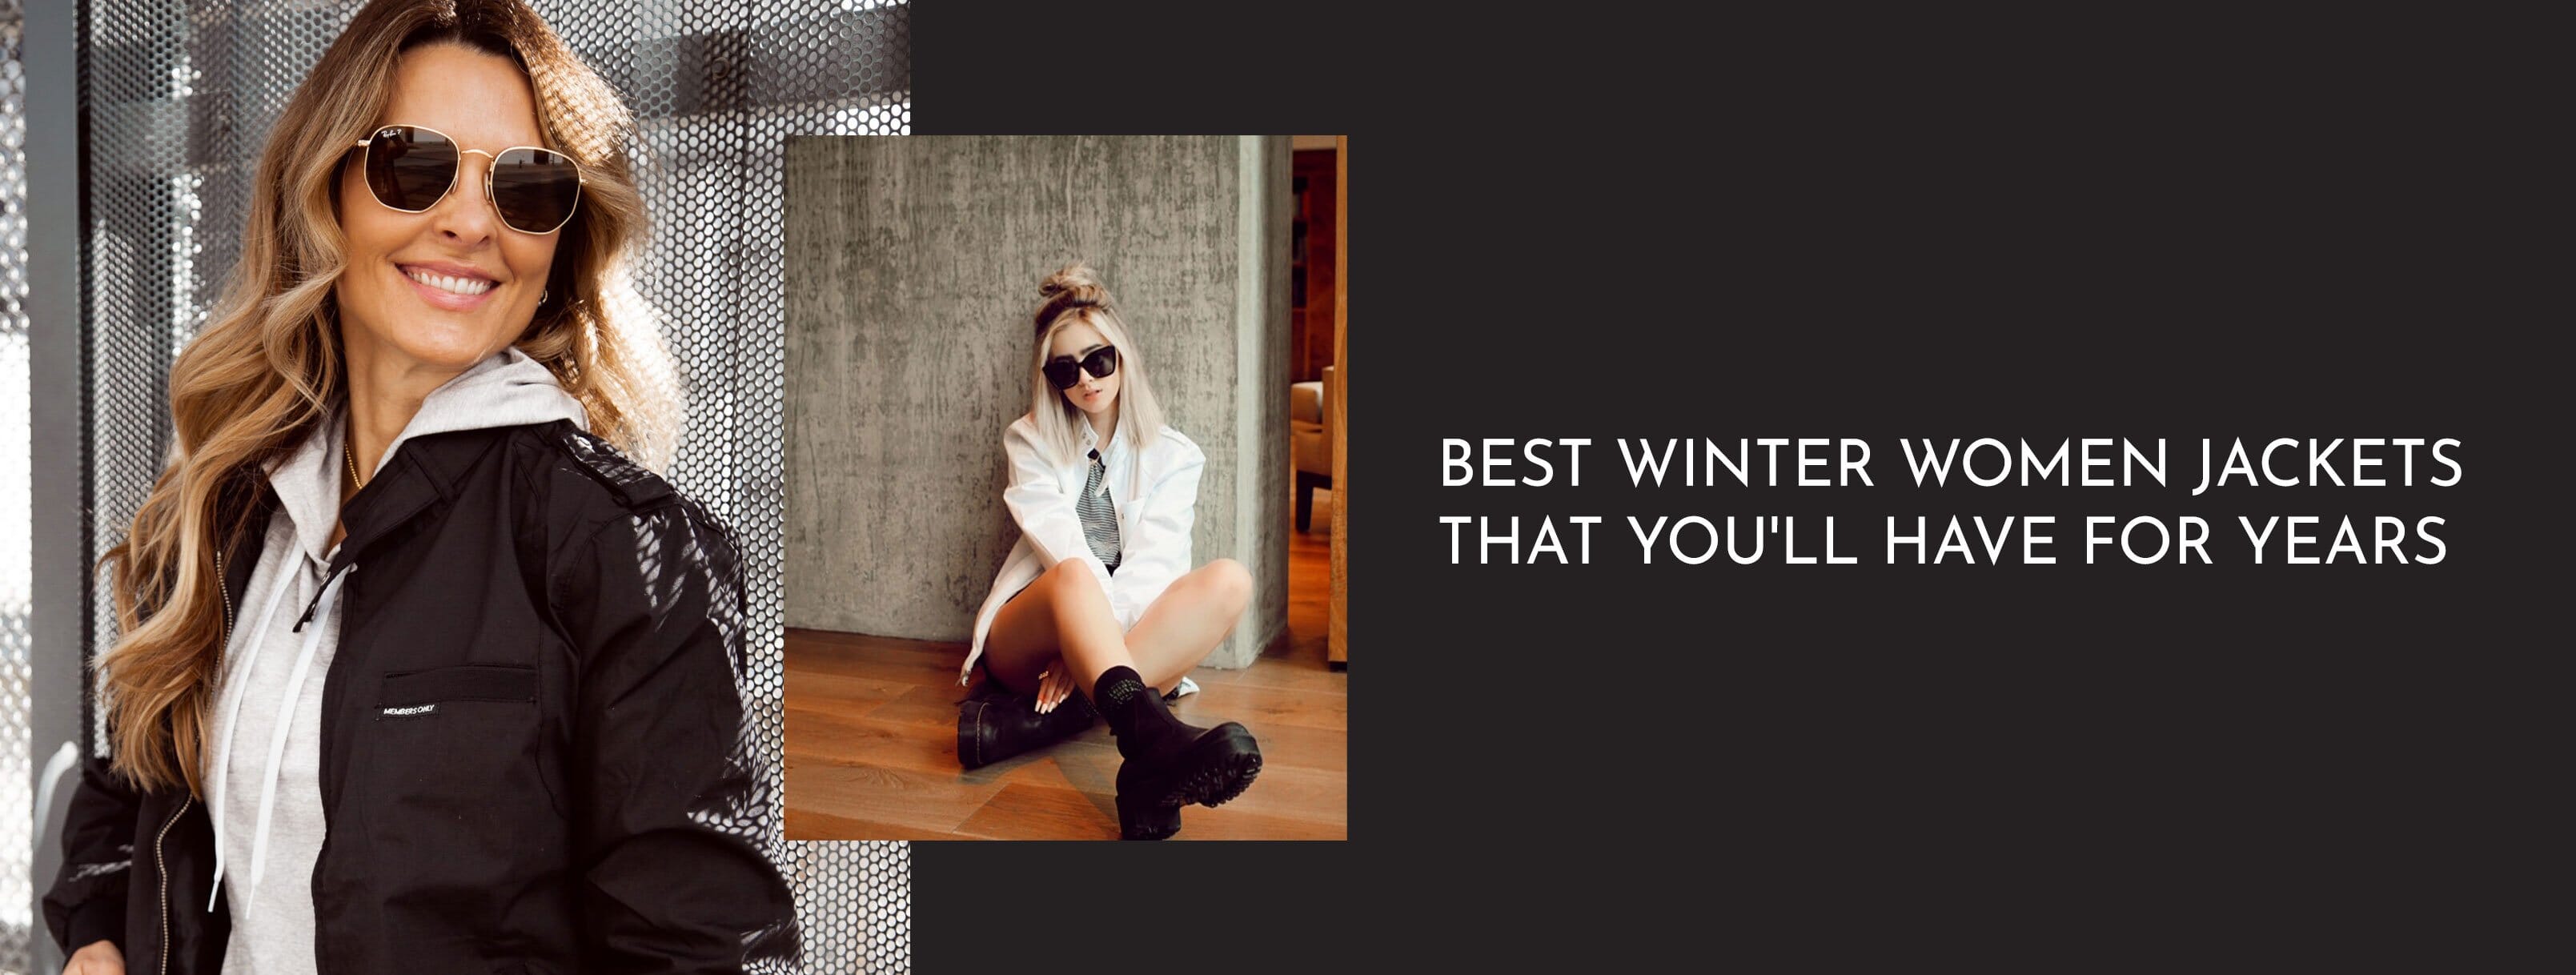 Best Winter Women Jackets that You'll Have for Years